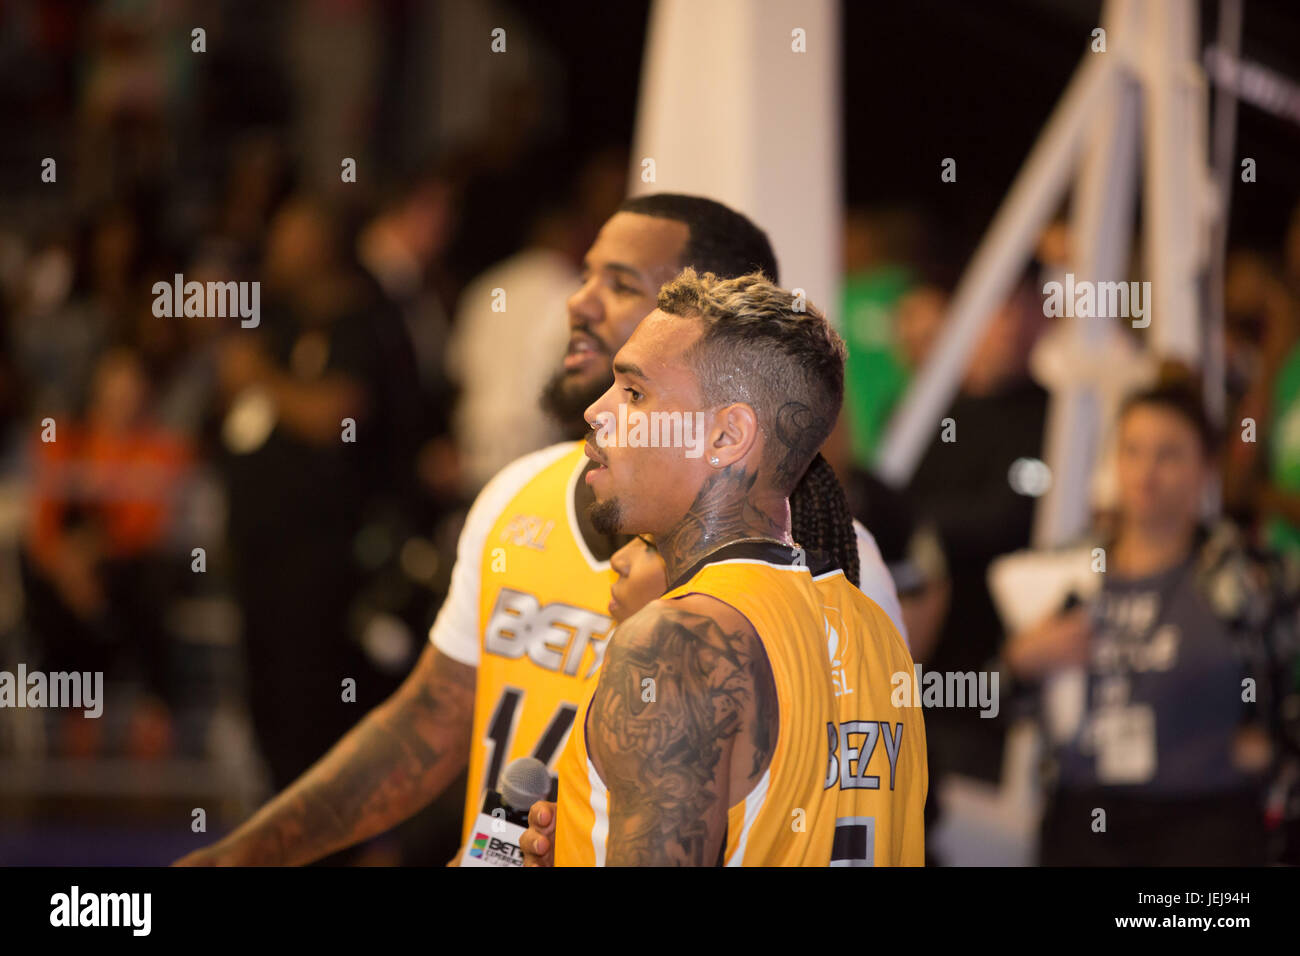 Los Angeles,USA. 24th June,2017. Chris Brown Celebrity Basketball Game,presented by Sprite State Farm,during 2017 BET Experience,at Los Angeles Convention Center June 24,2017 Los Angeles,California. Stock Photo